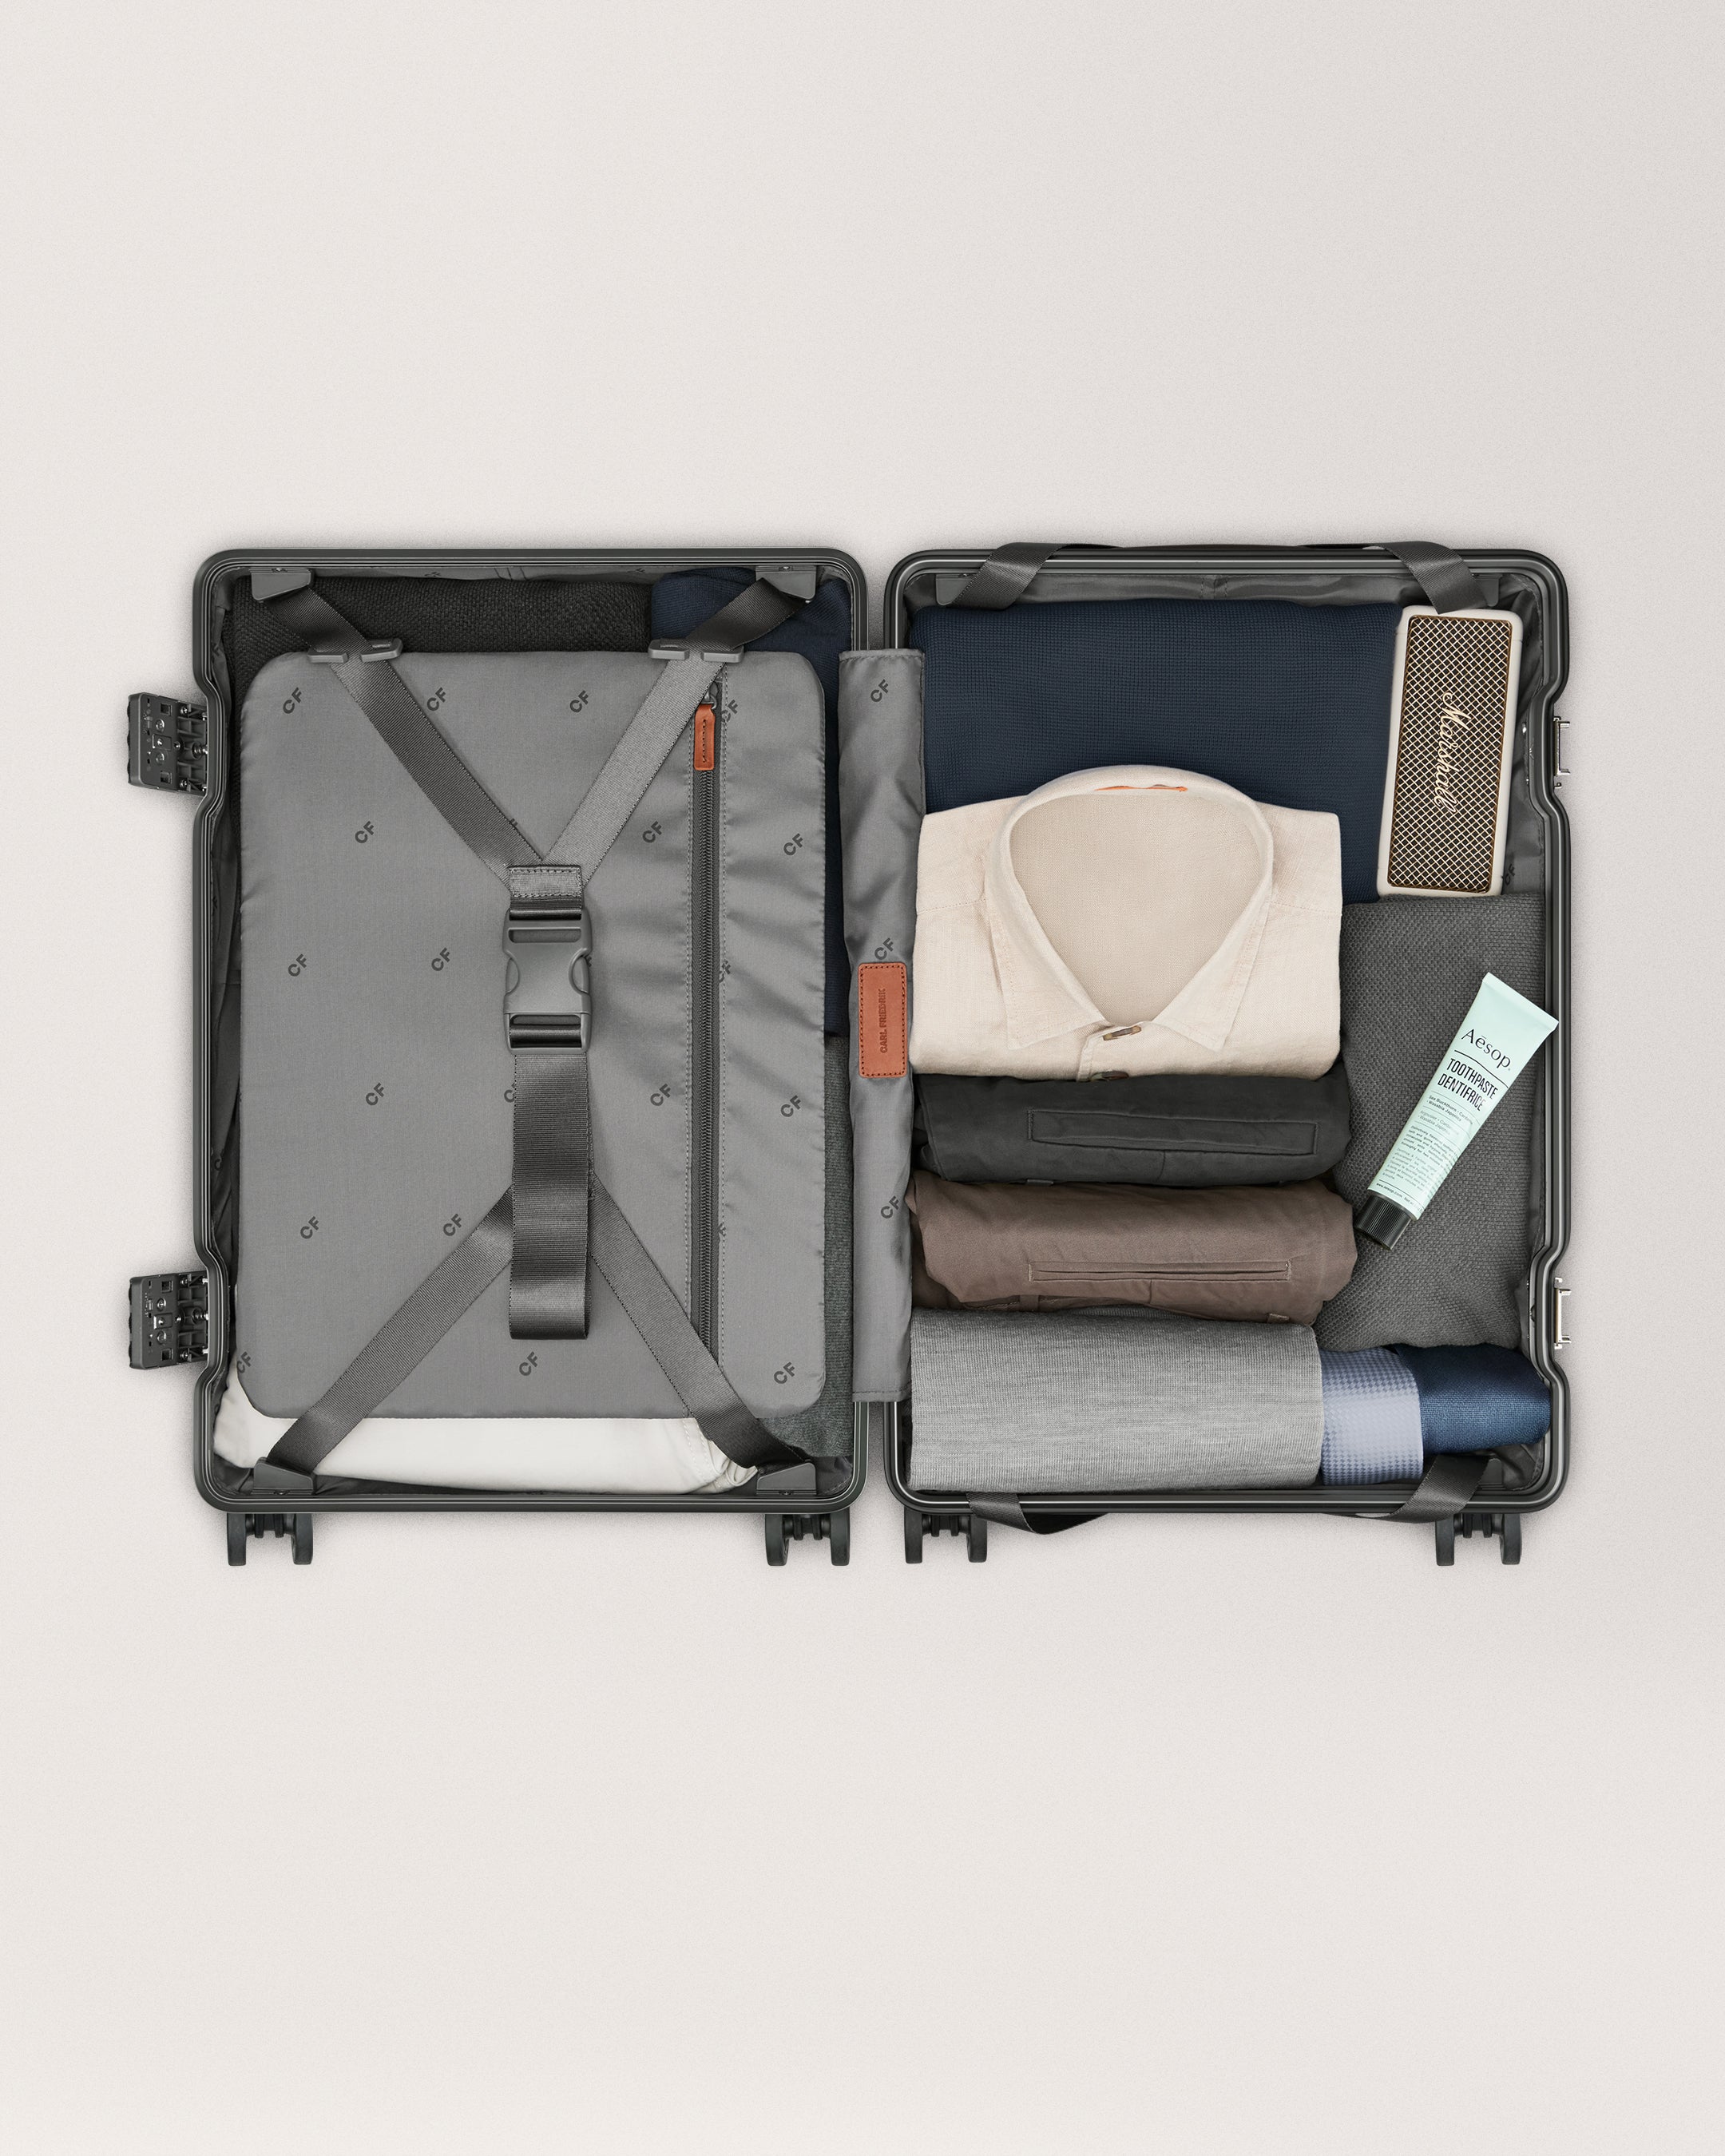 Compression Pad (The Carry-on) · CarlFriedrik